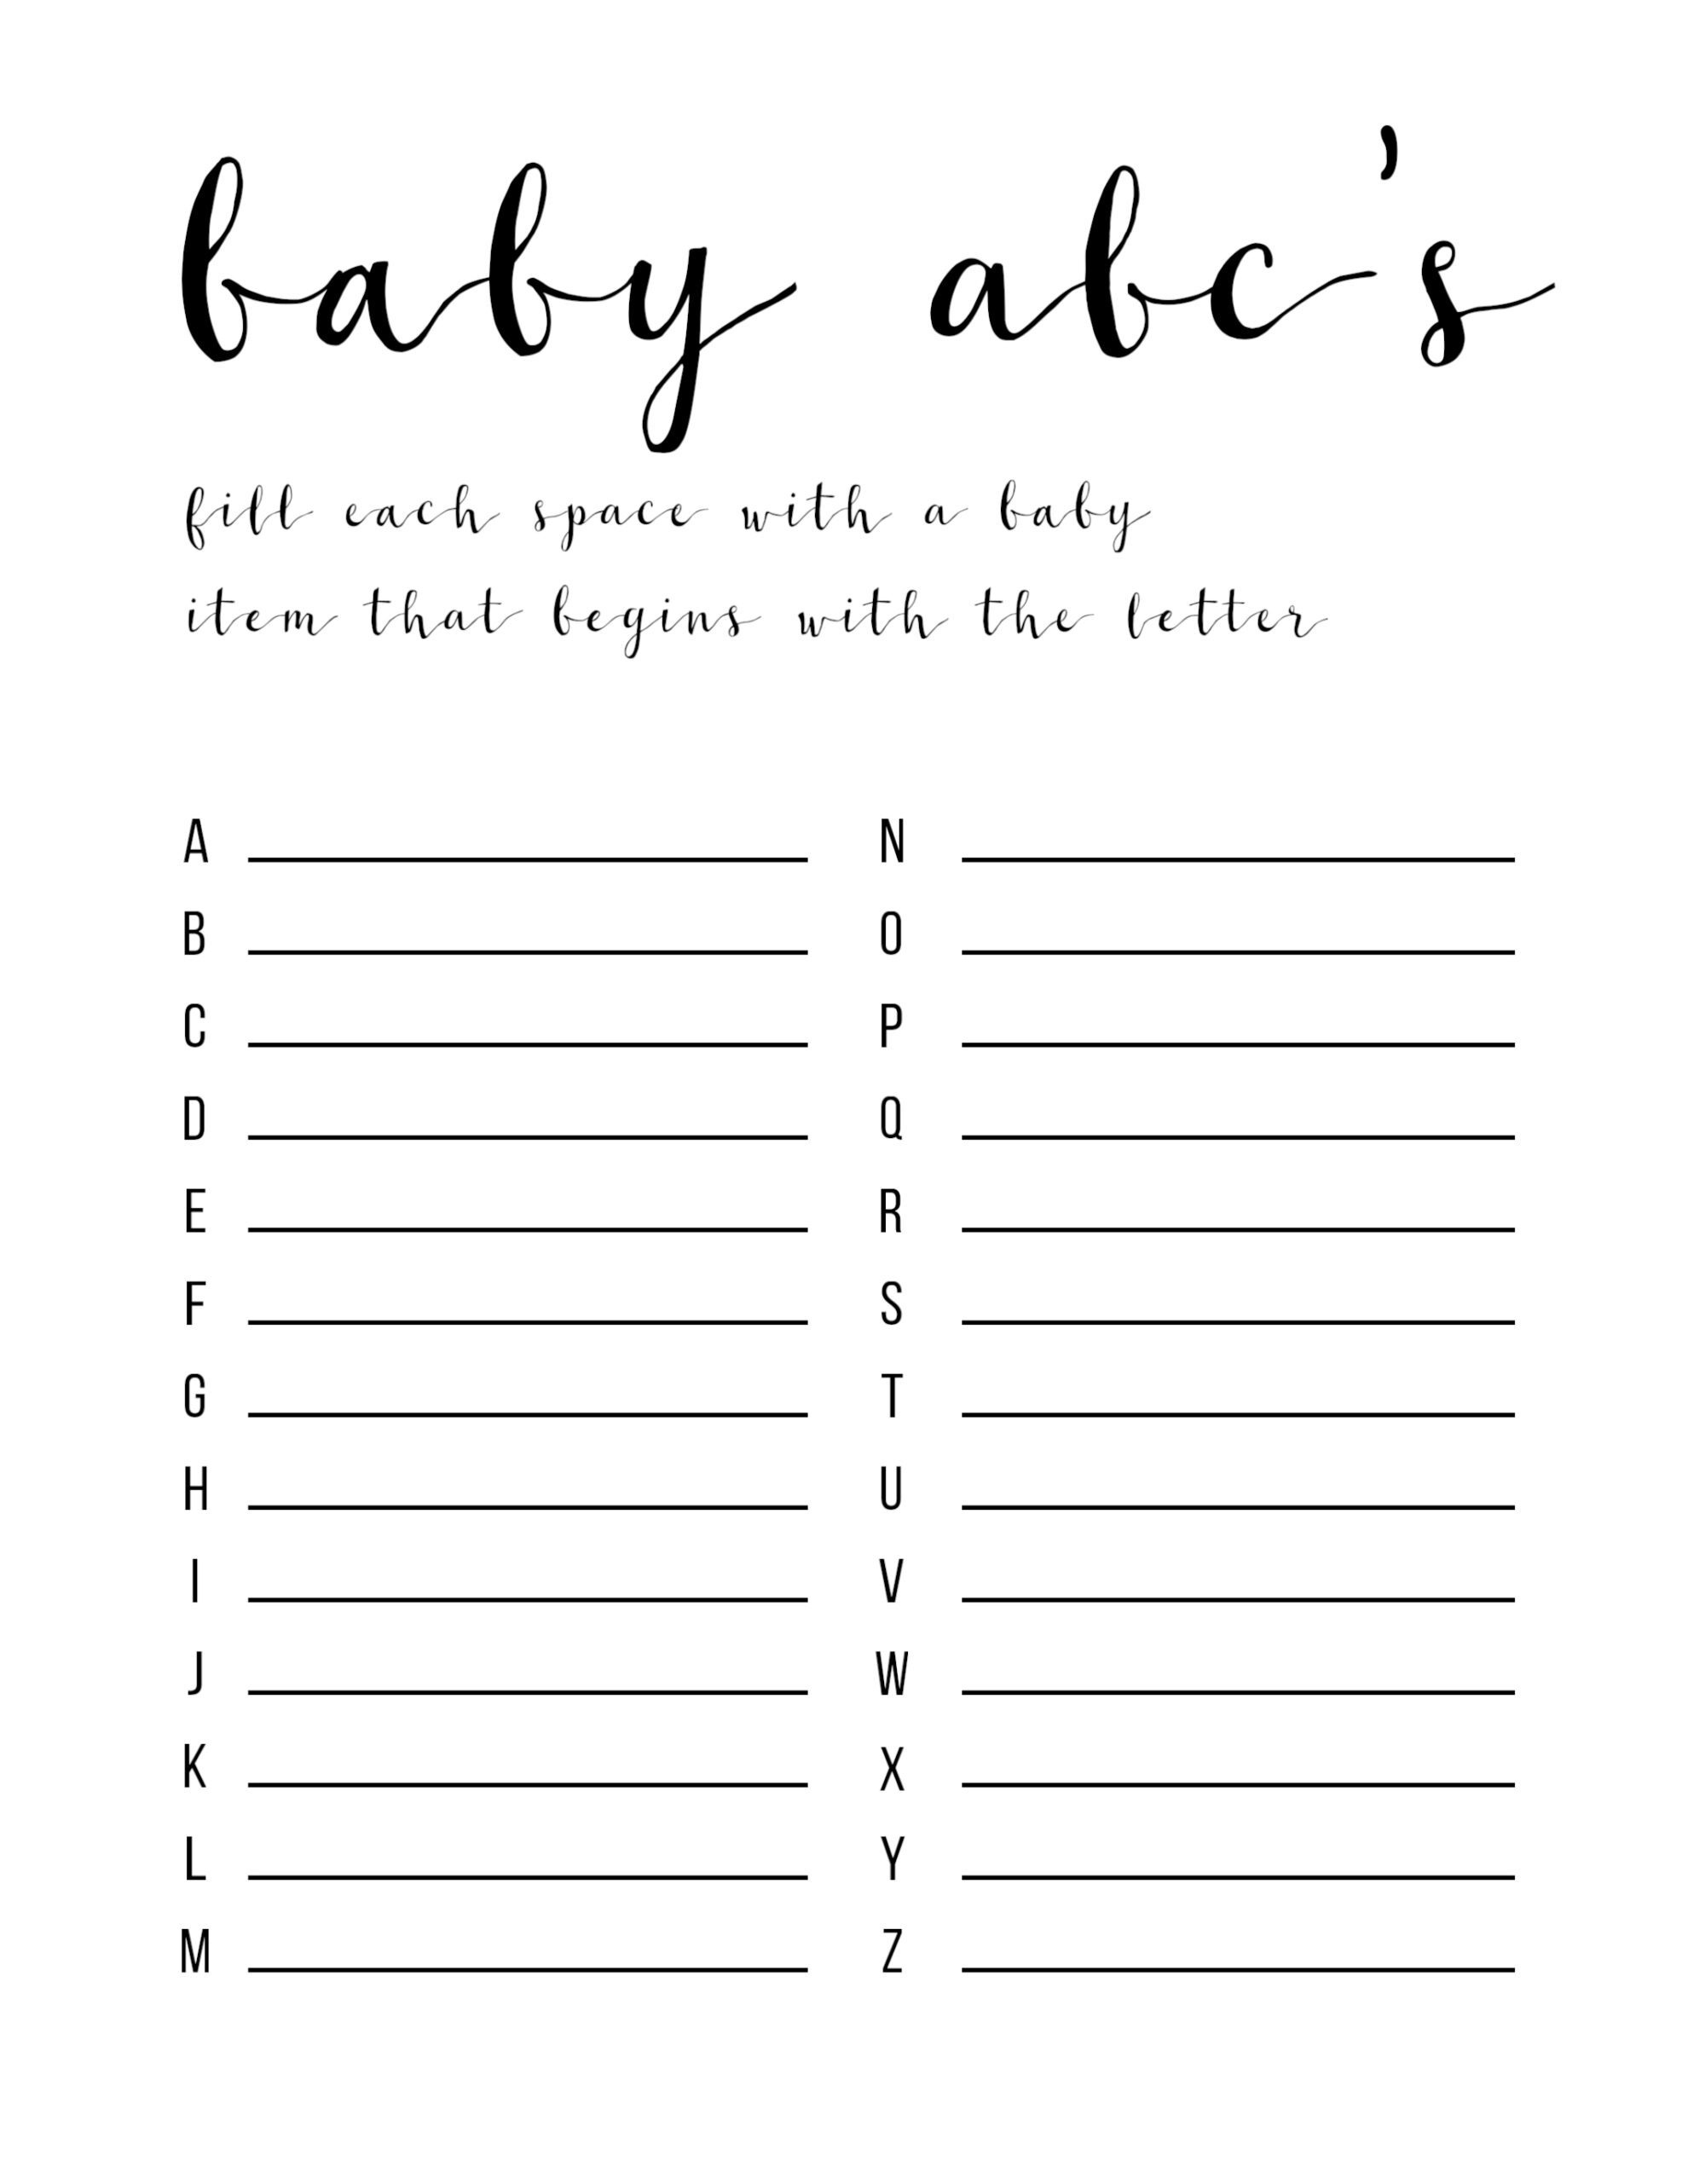 Baby Shower Games Ideas {Abc Game Free Printable} - Paper Trail Design - Free Printable Games